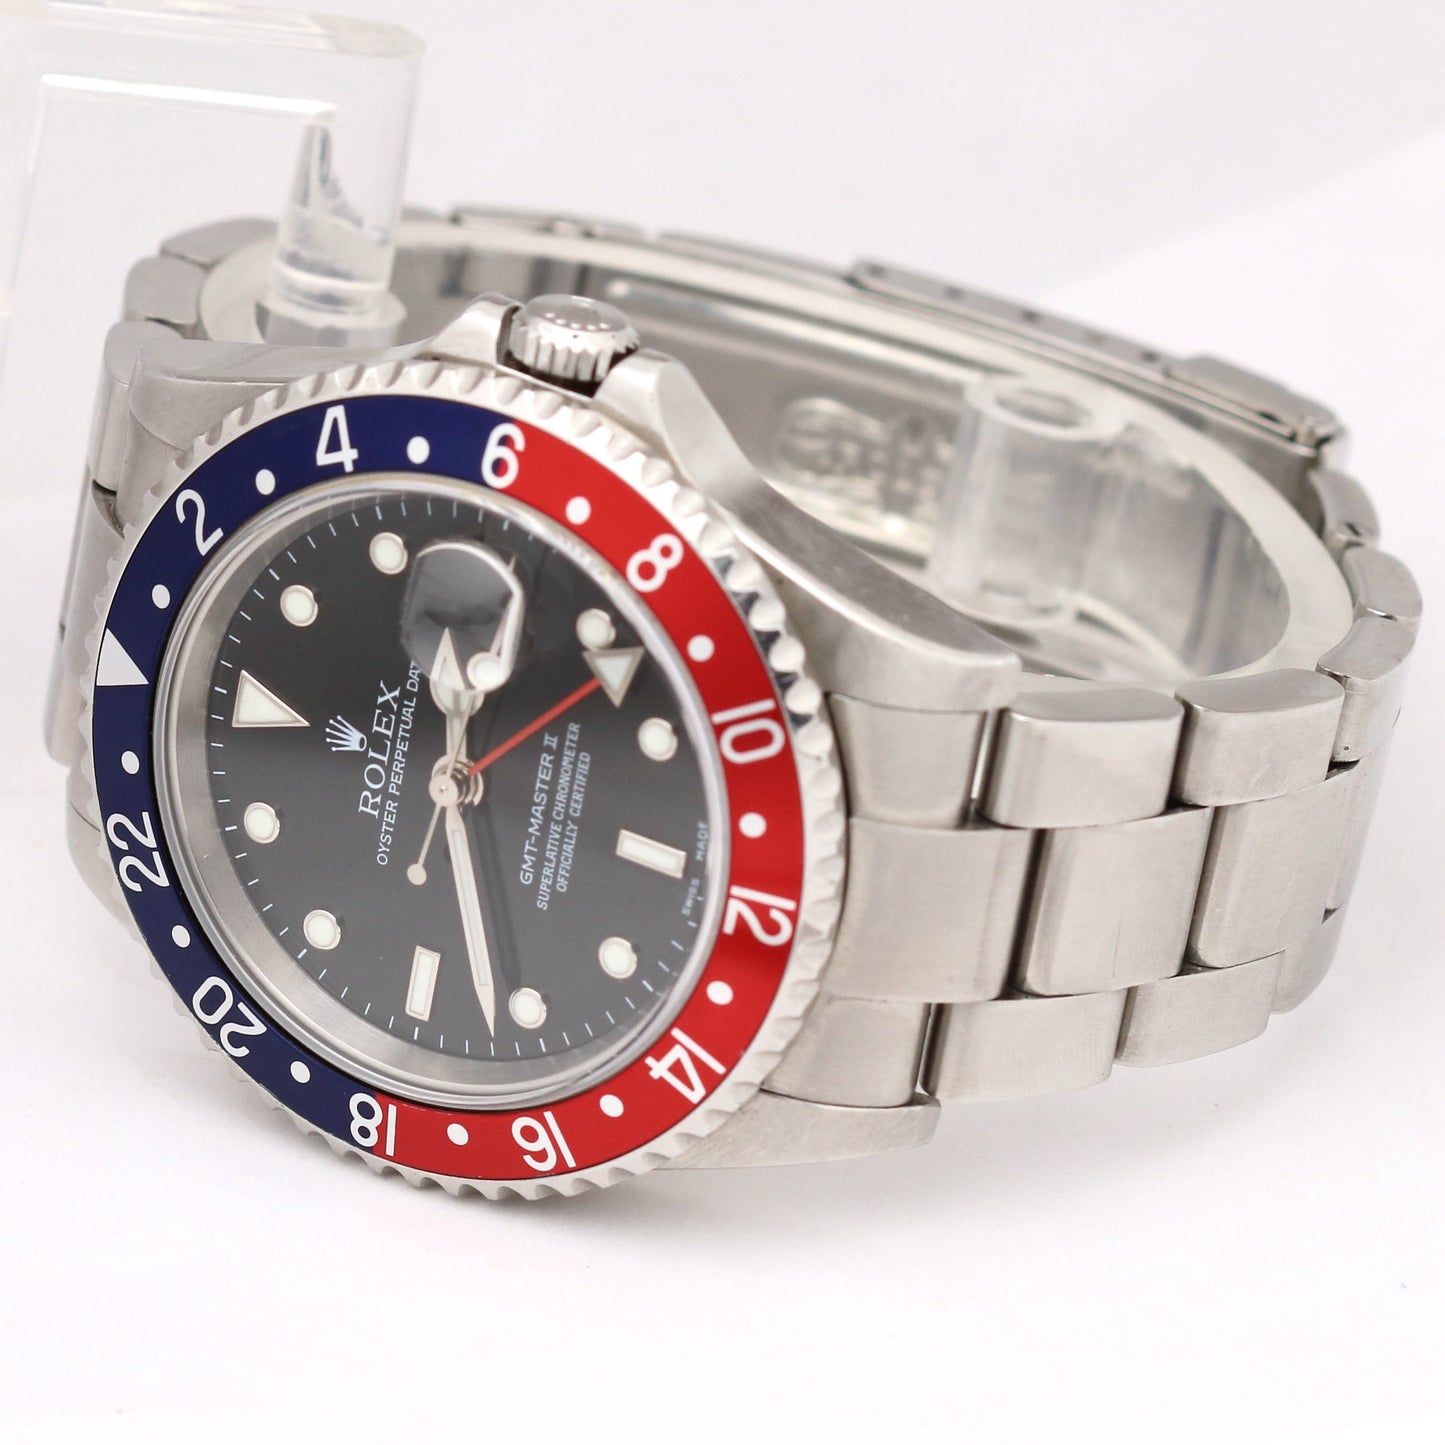 UNPOLISHED Rolex GMT-Master II PEPSI Blue Red NO HOLES Steel 40mm 116710 Watch